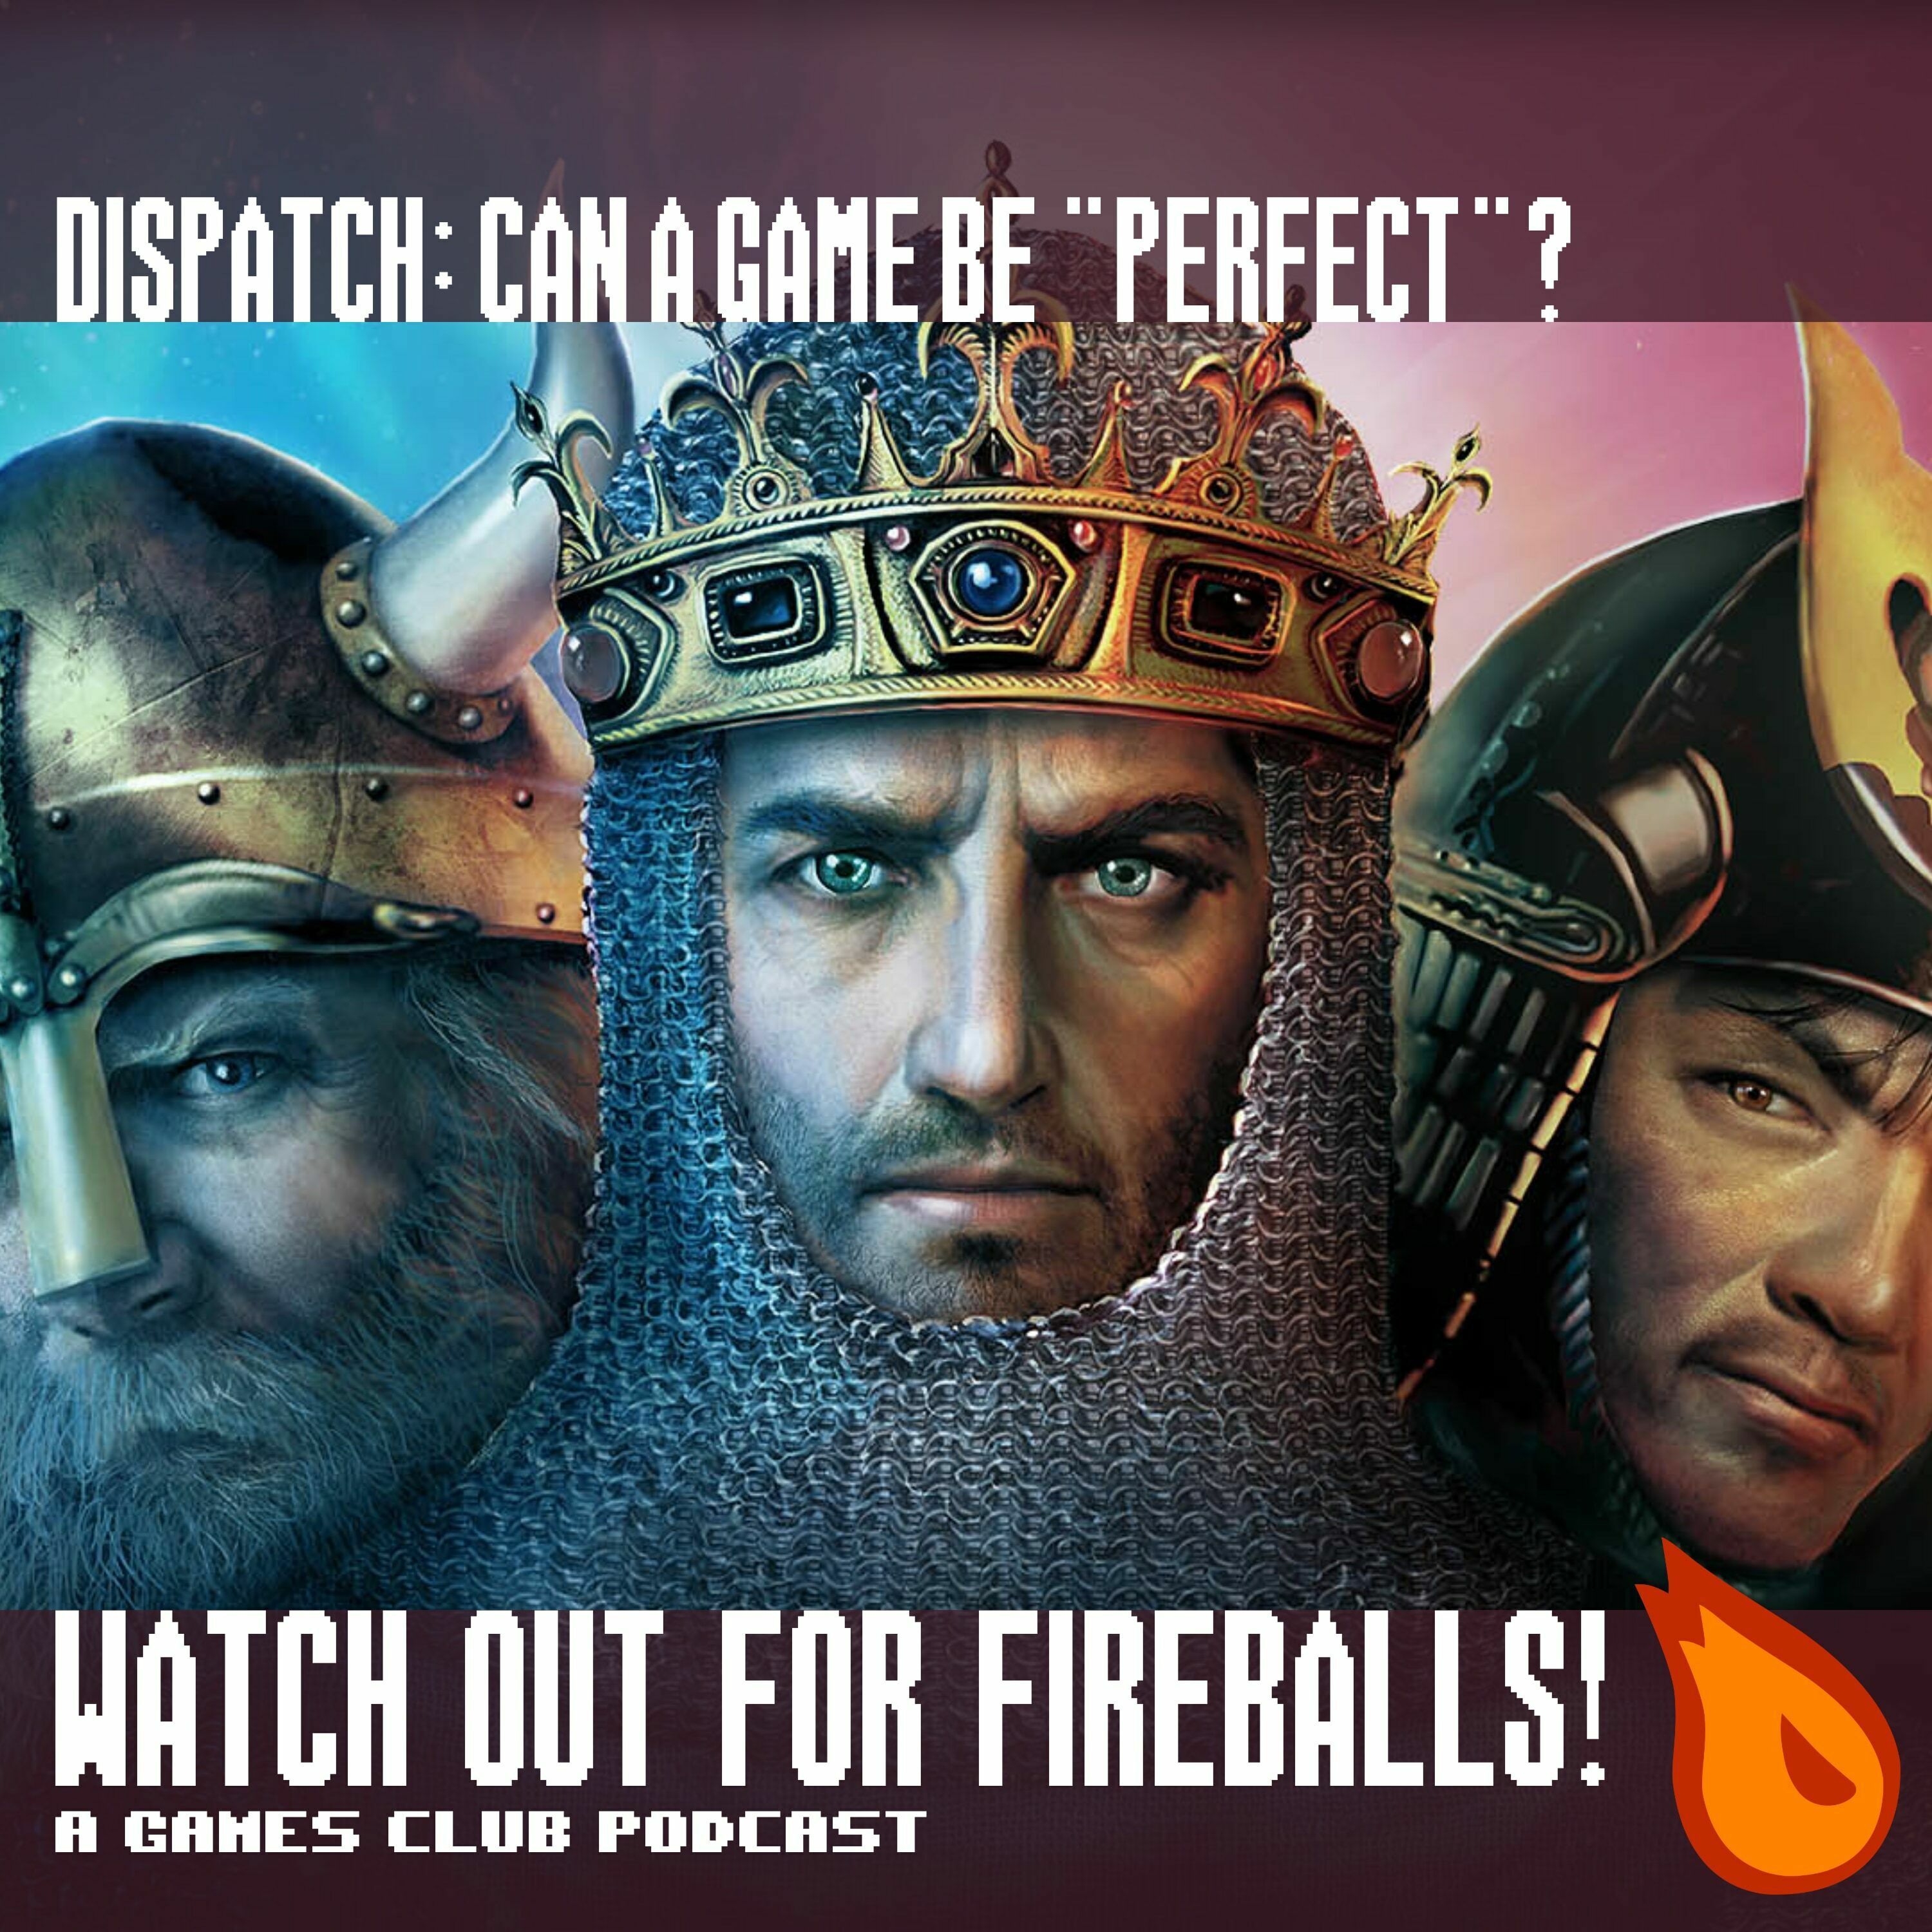 WOFFF Dispatch: Can Games Be ”Perfect”?